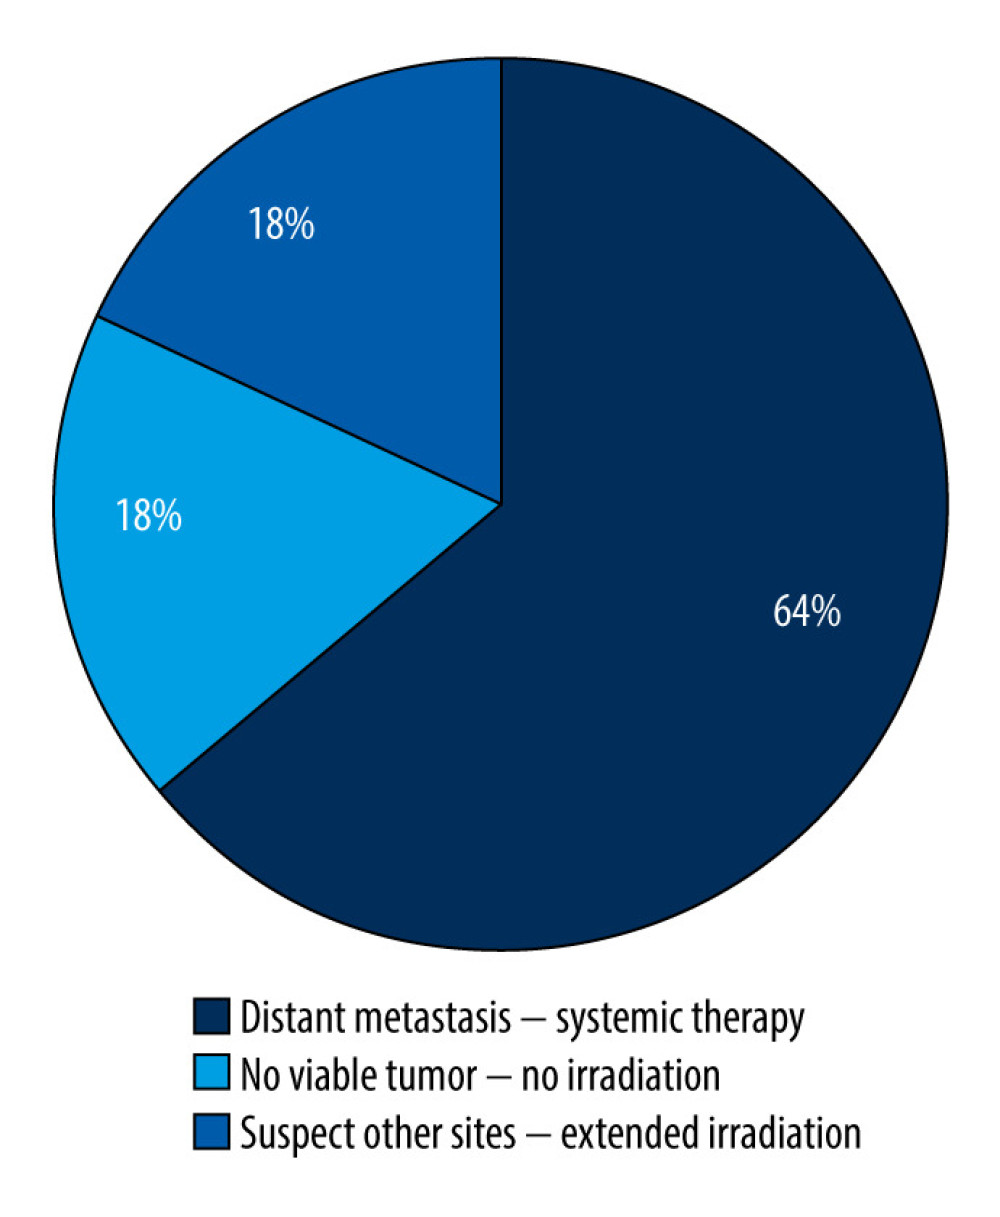 Reasons for therapeutic changes.